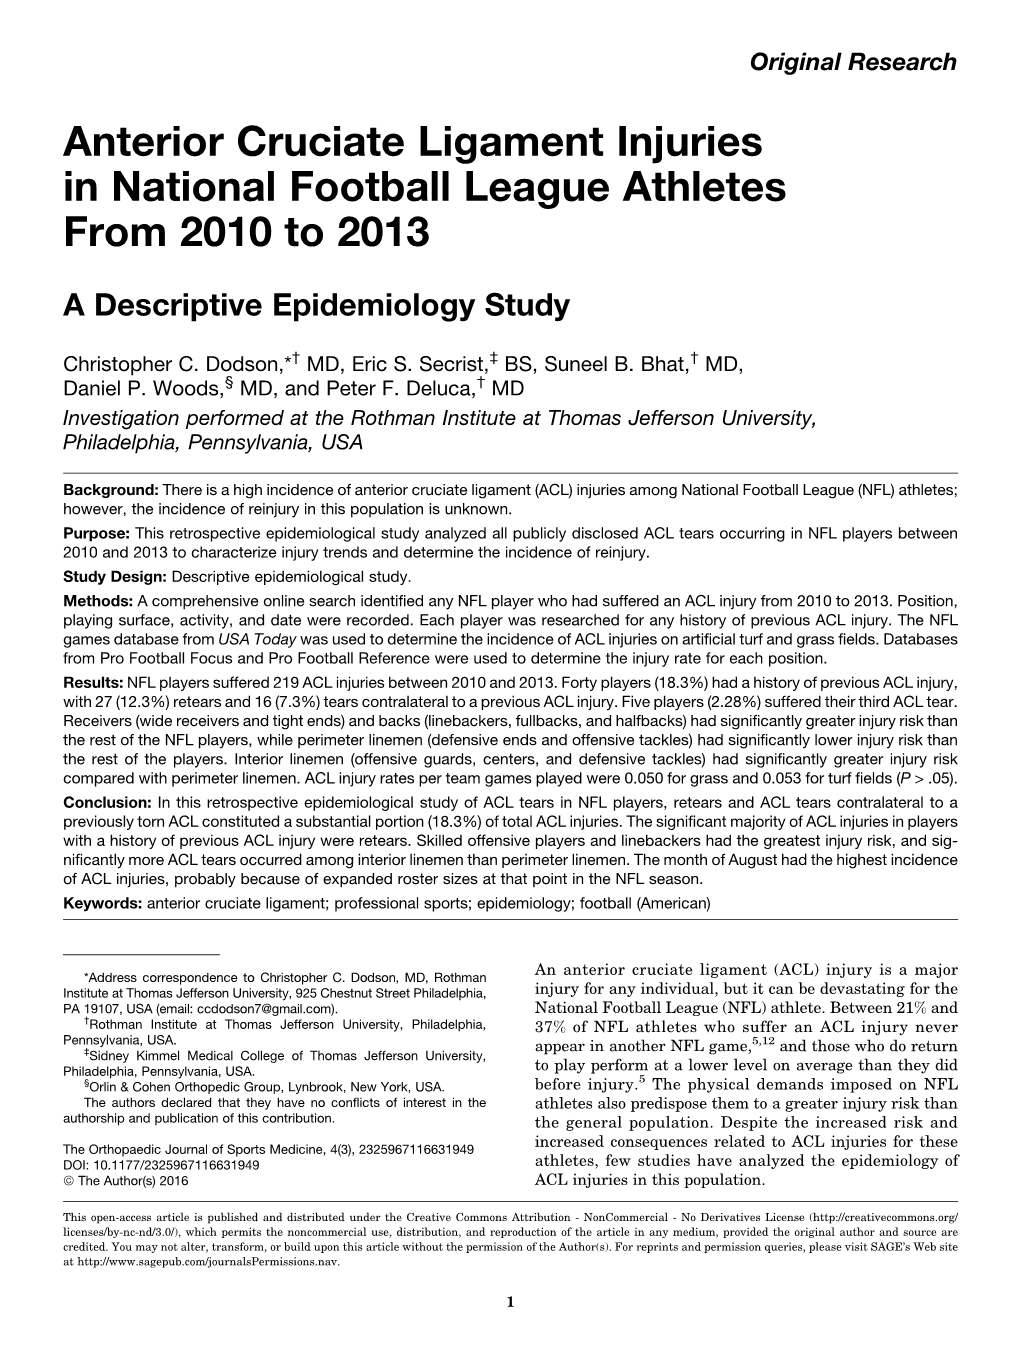 Anterior Cruciate Ligament Injuries in National Football League Athletes from 2010 to 2013